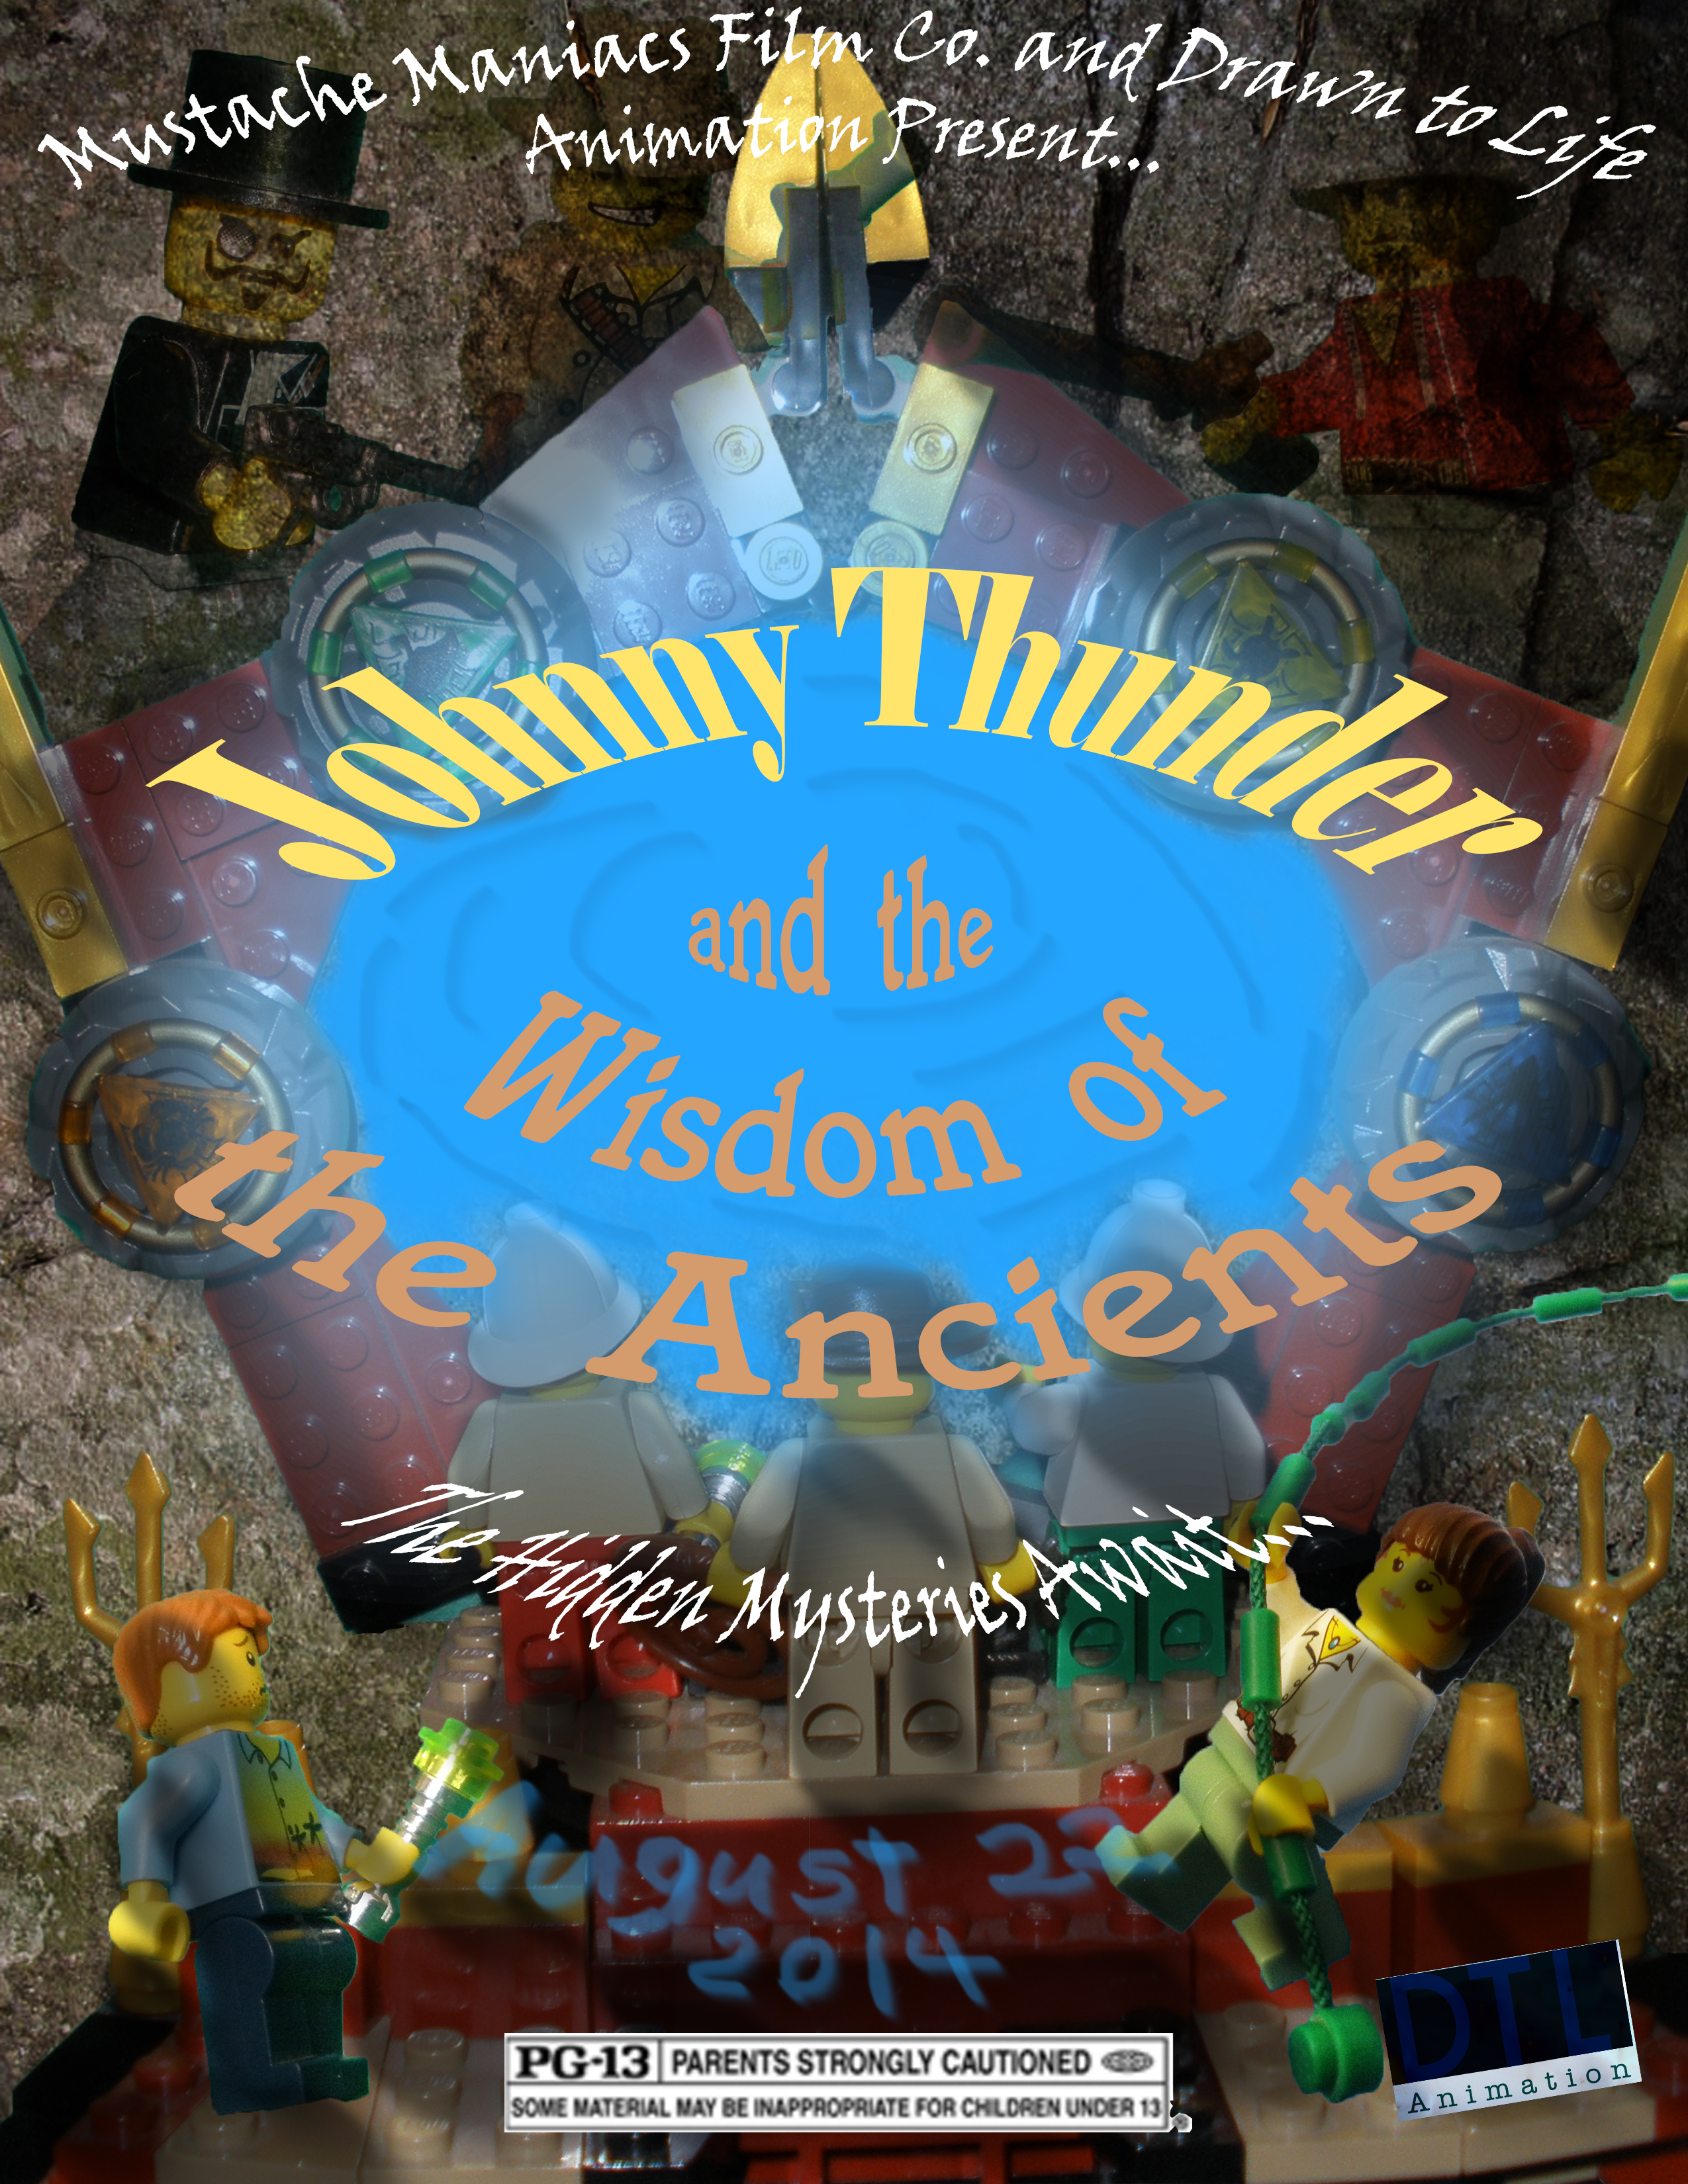 Johnny Thunder and the Wisdom of the Ancients, Mustache Maniacs Film Co.  Wiki